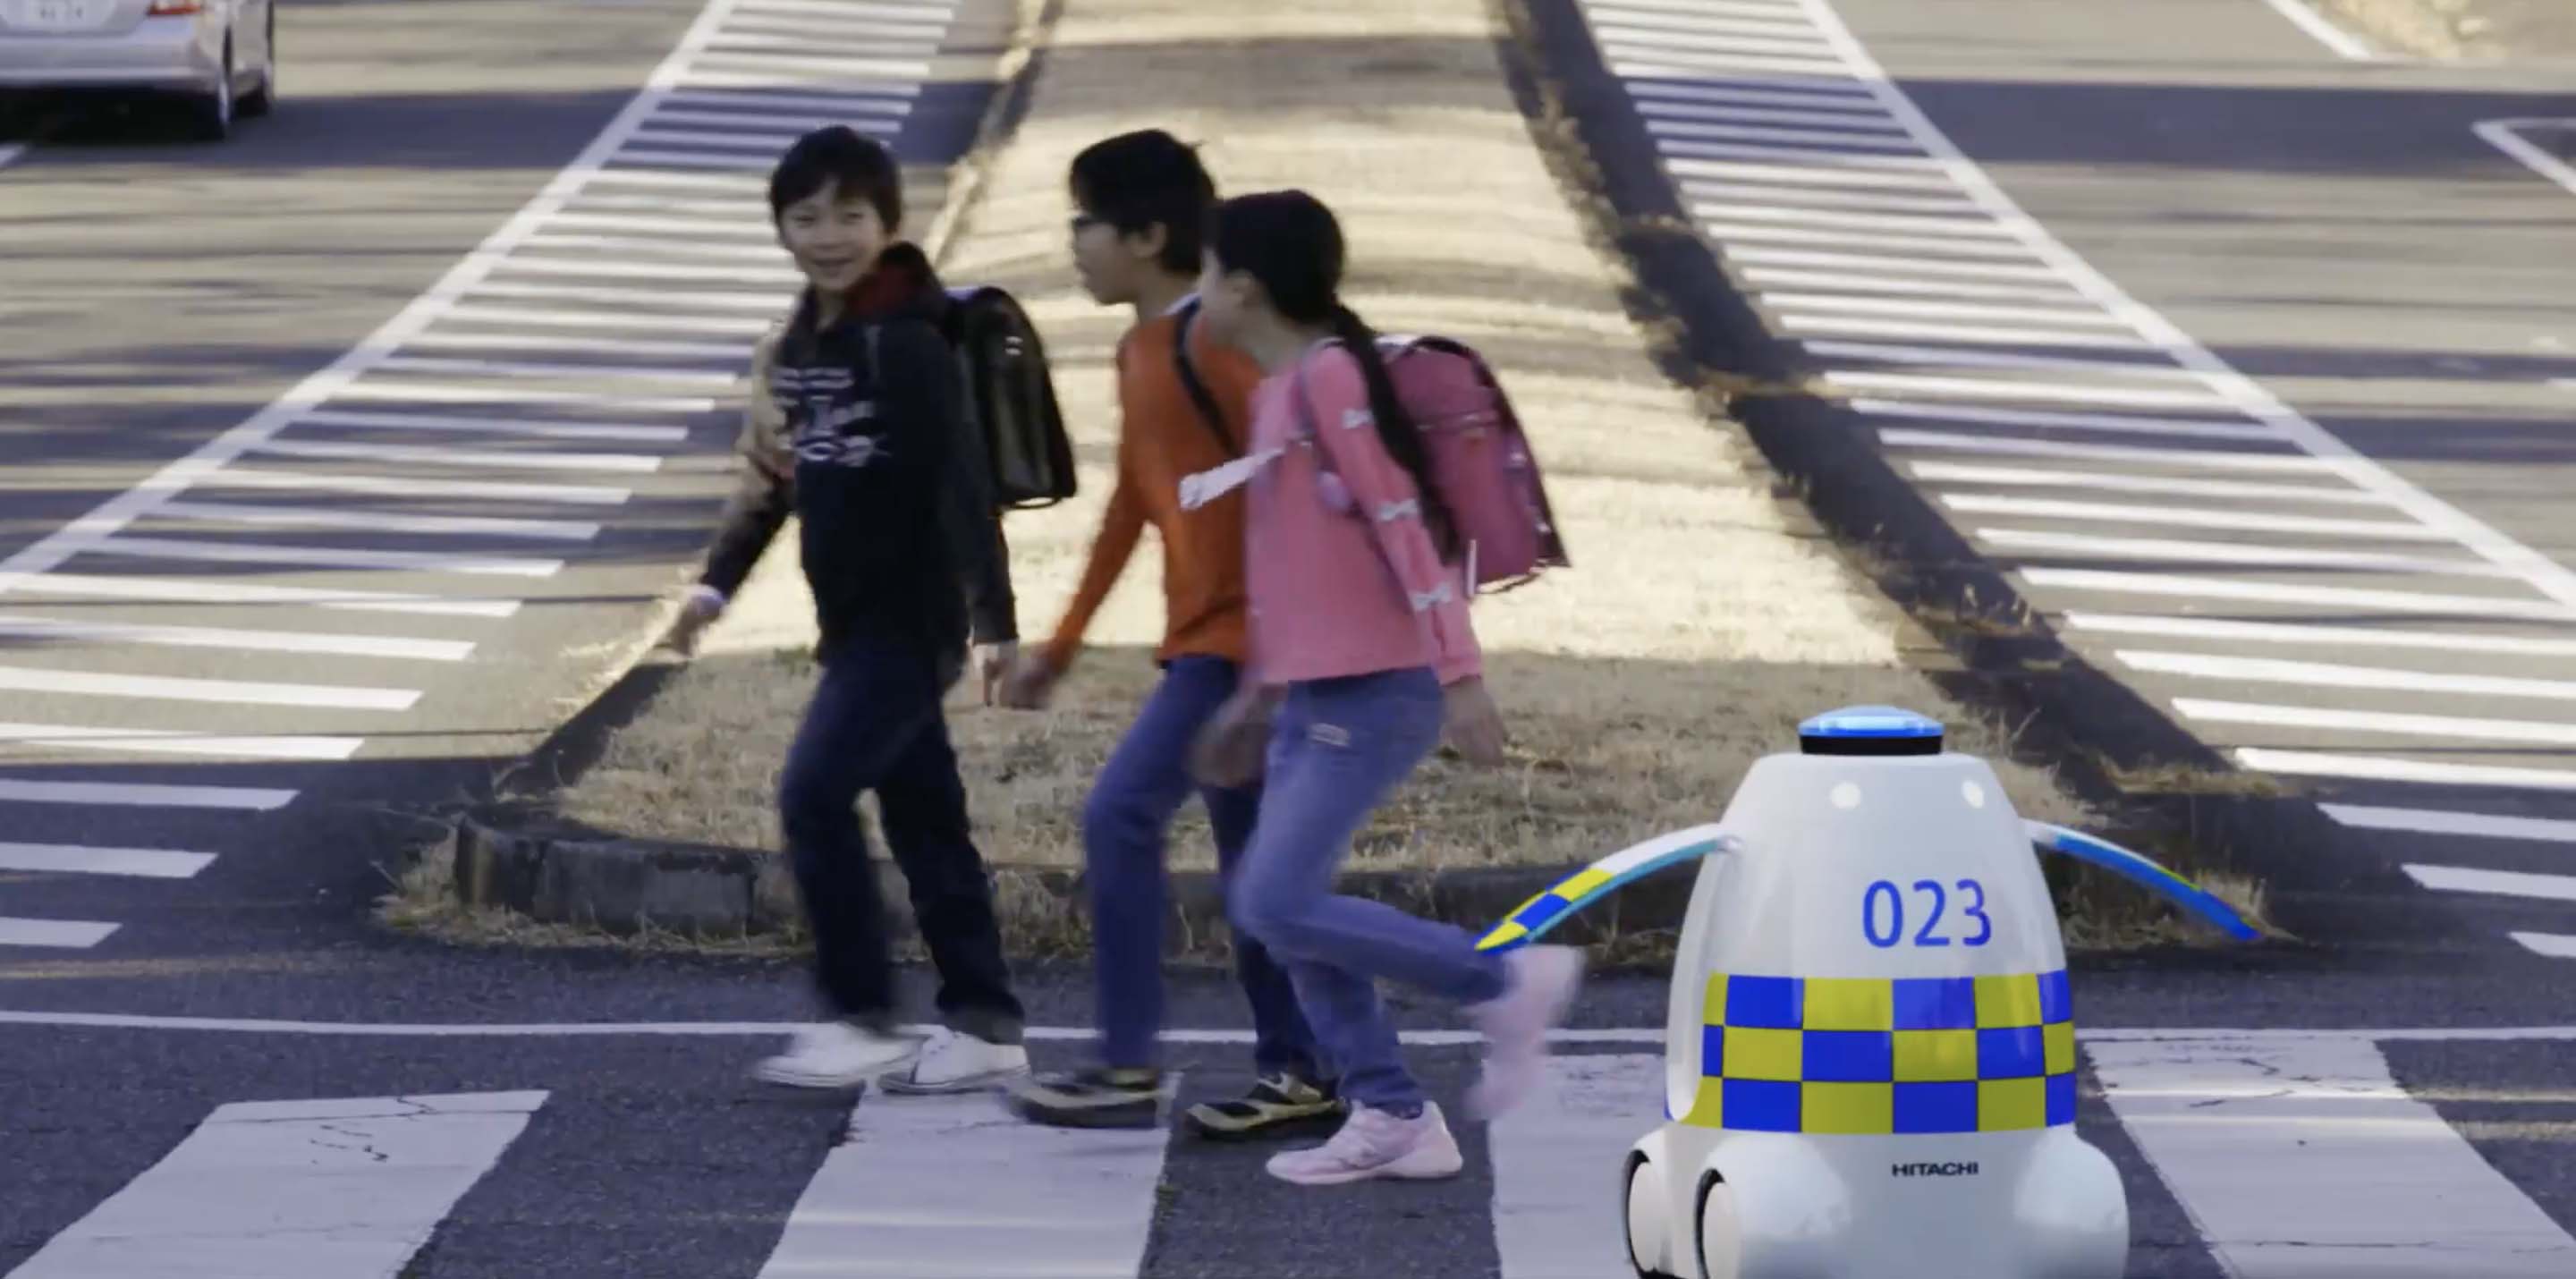 With an interest in social impact and public safety, Hitachi is exploring the benefits of having robots act as urban ushers. (Image: Hitachi)